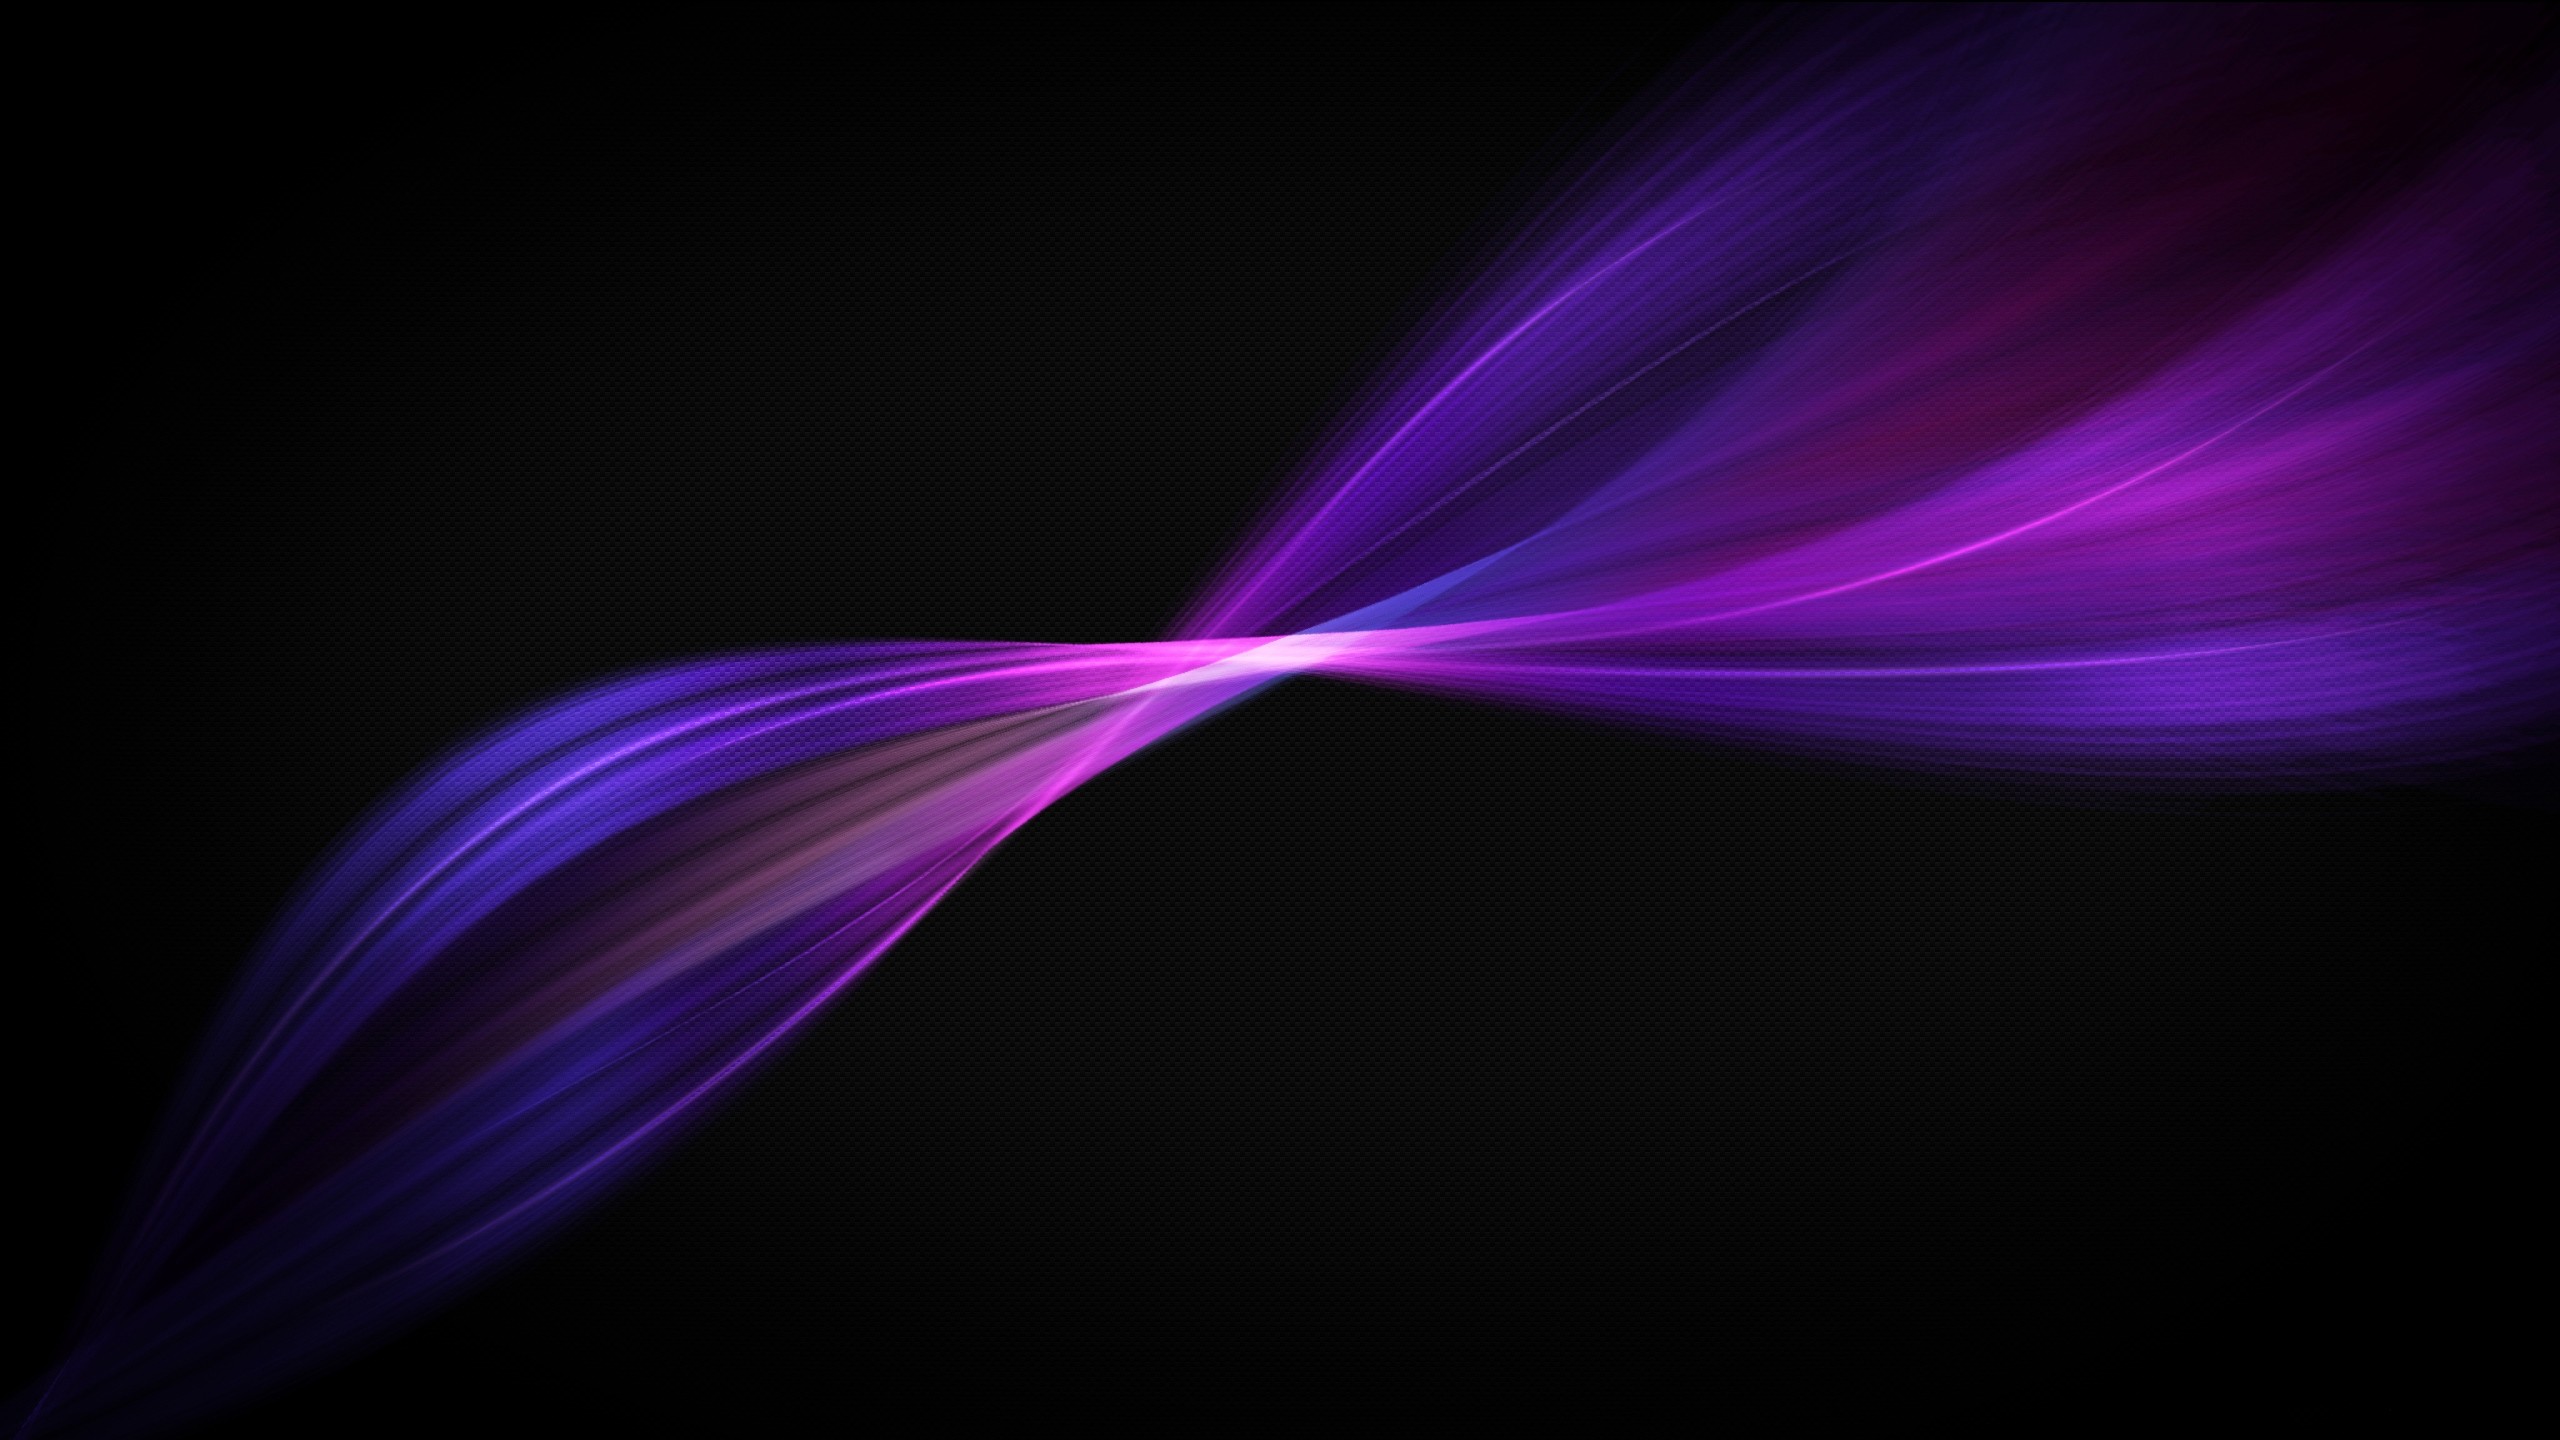 2560x1440 best images about Neon background on Pinterest Neon purple